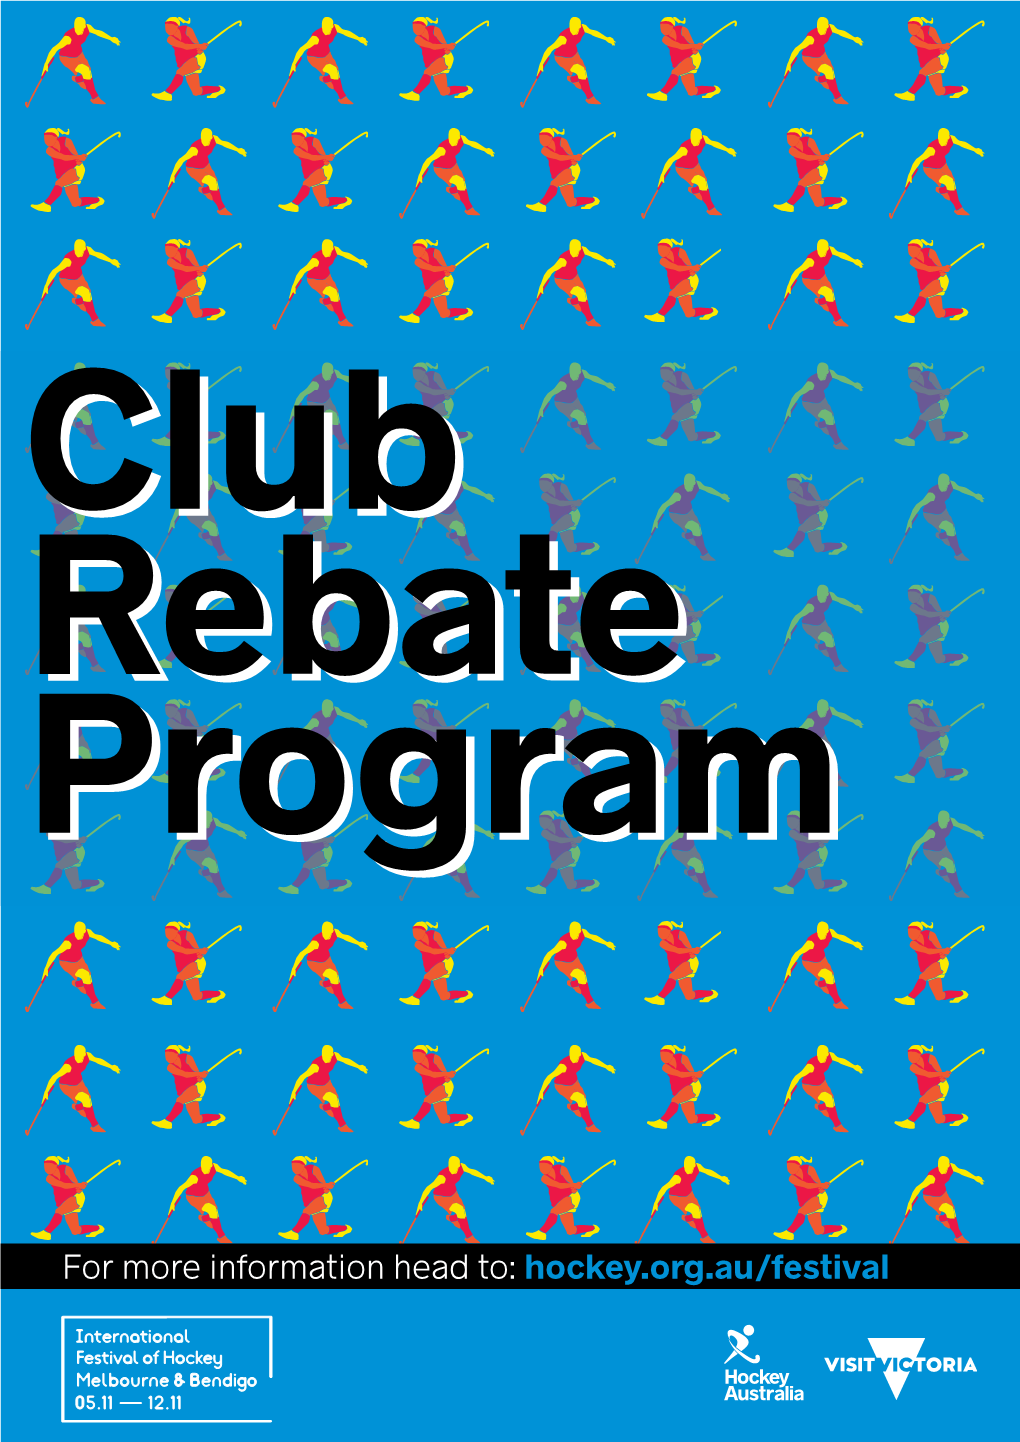 For More Information Head To: Hockey.Org.Au/Festival Hockey Australia Is Proud to Launch the Club Rebate Program for the International Festival of Hockey 2017